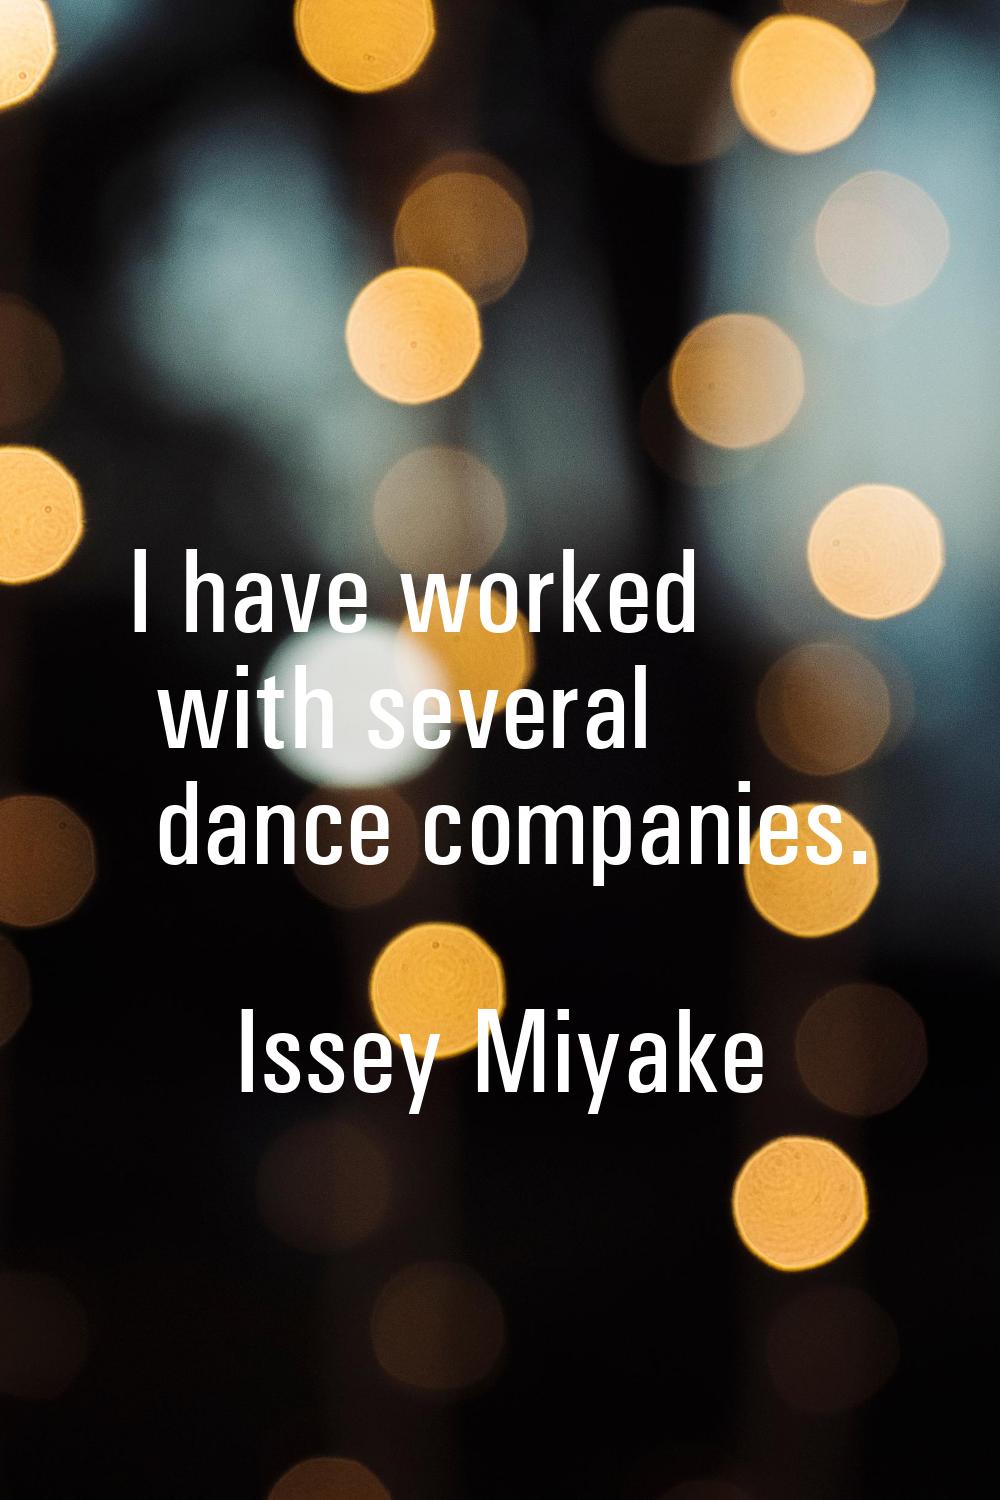 I have worked with several dance companies.